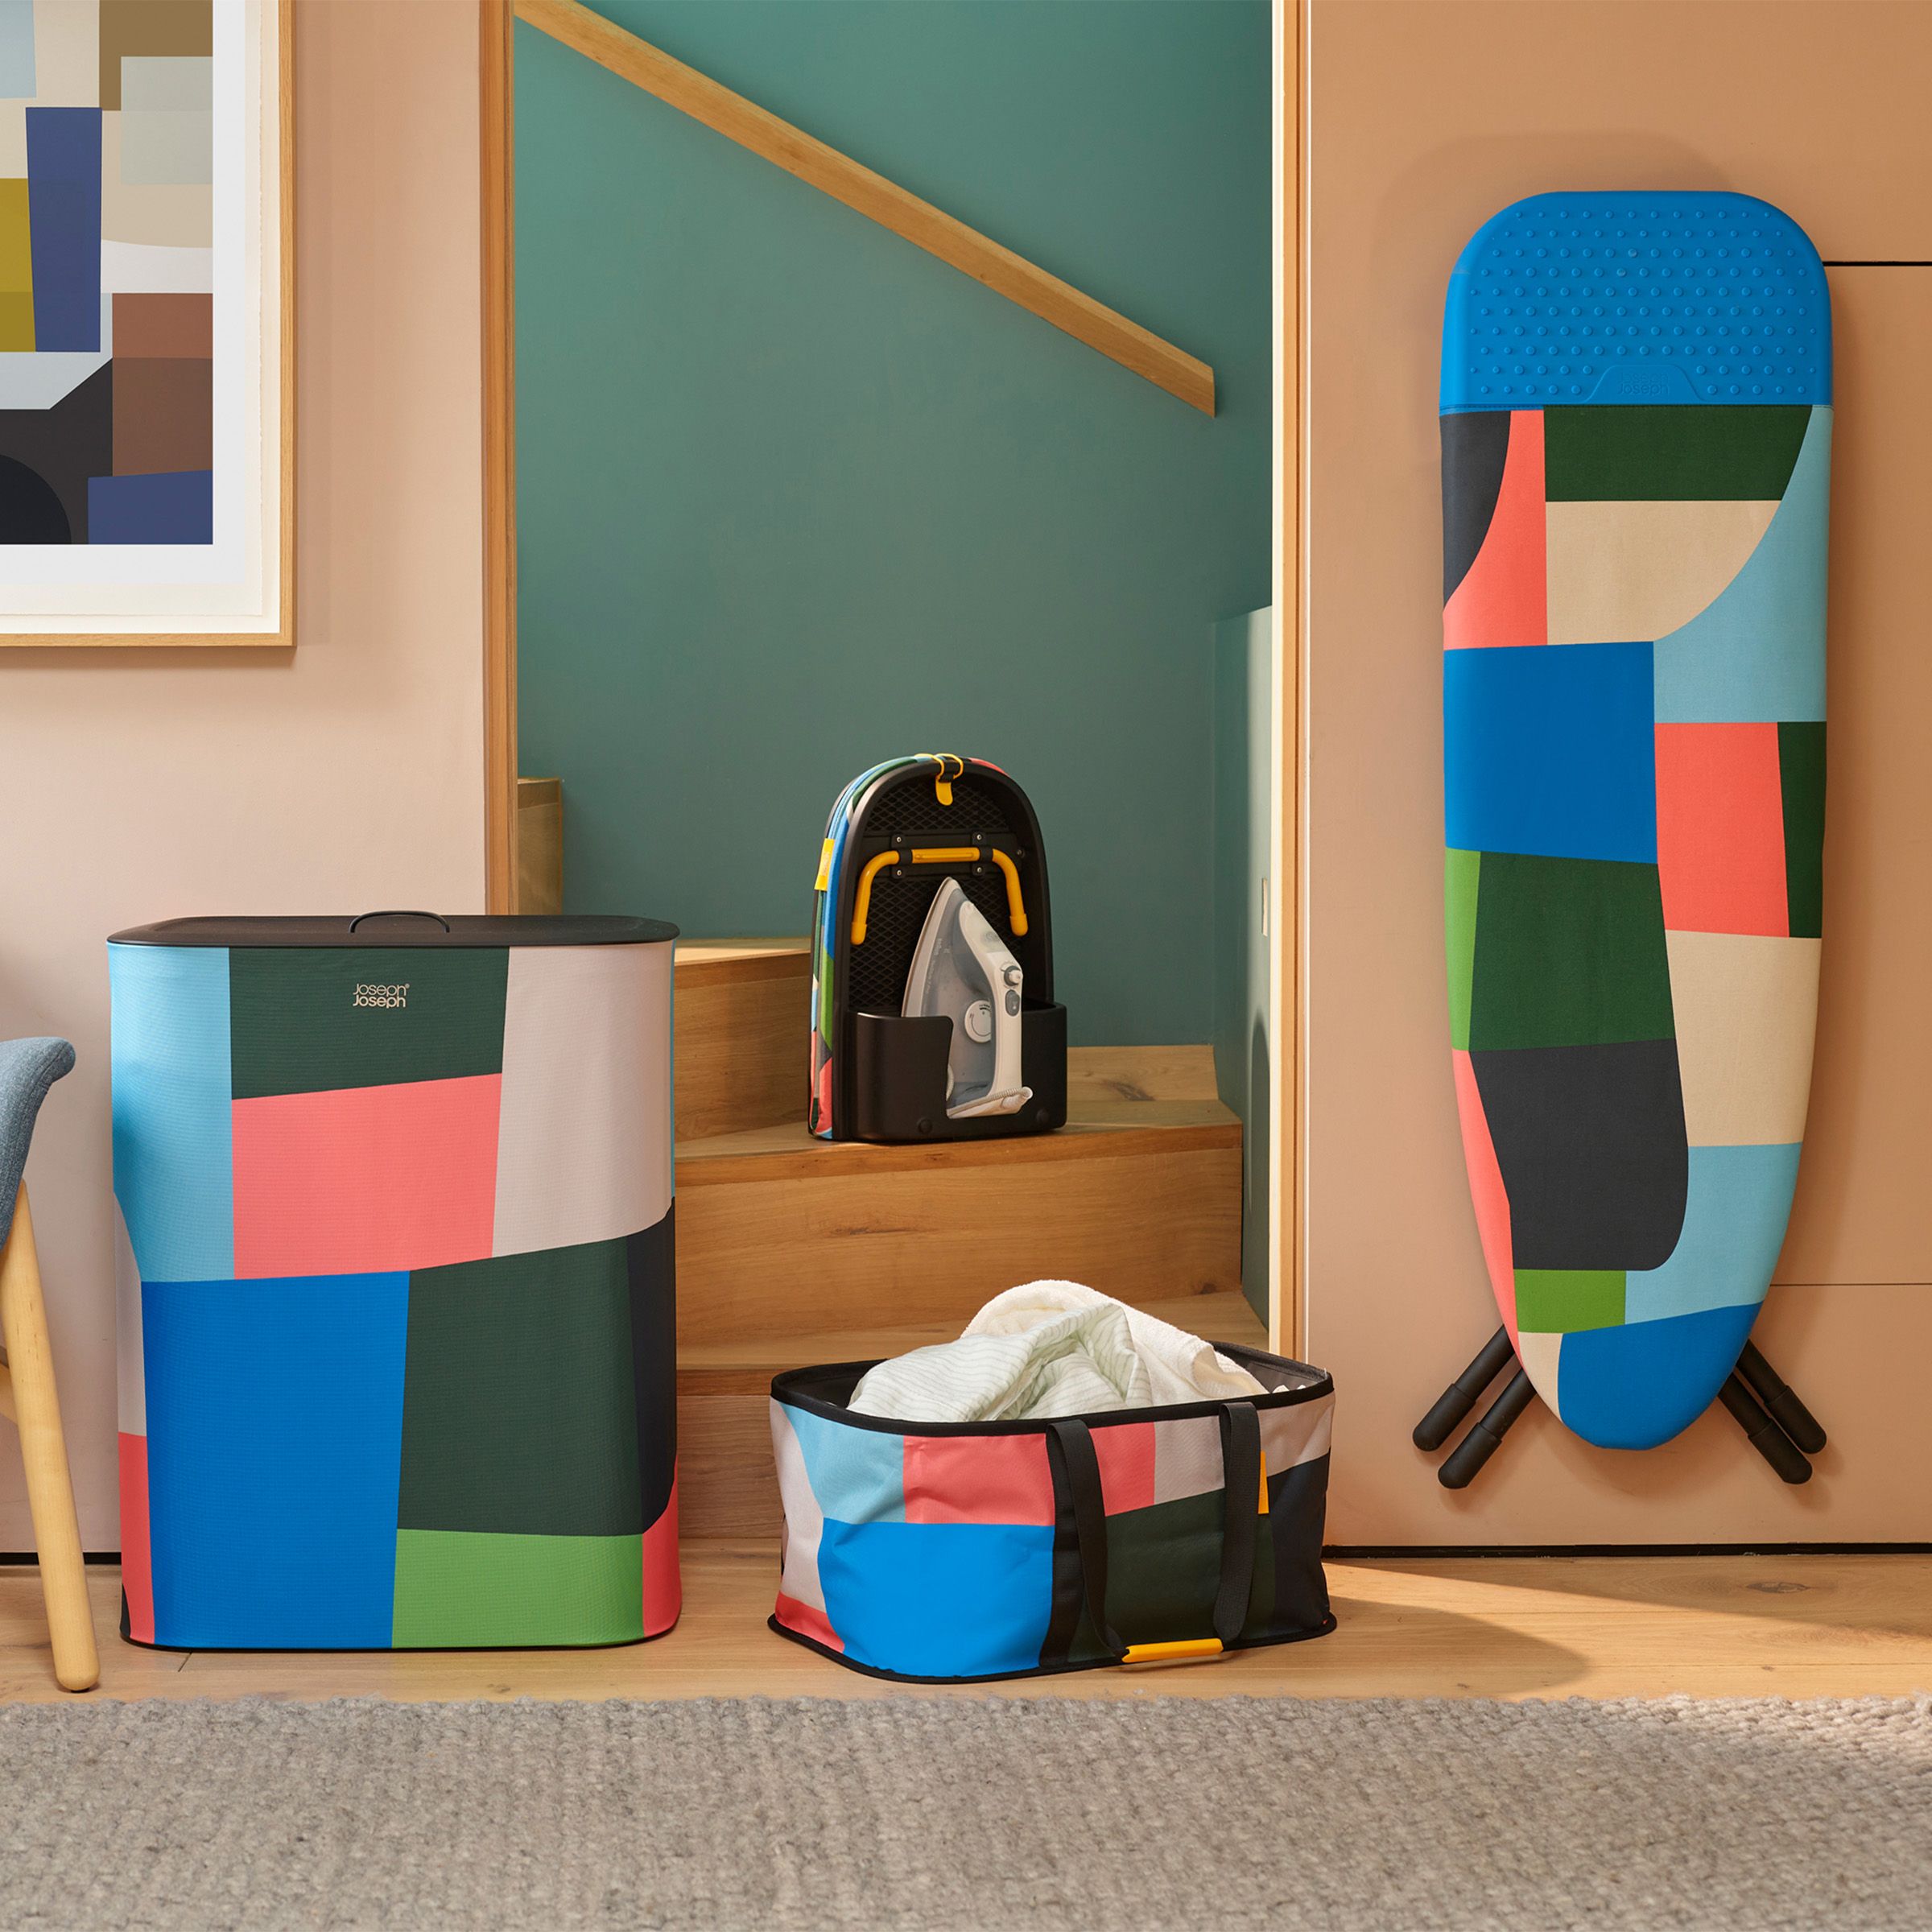 Joseph Joseph iconic laundry solutions meet gallery-worthy graphics in this limited-edition collection.